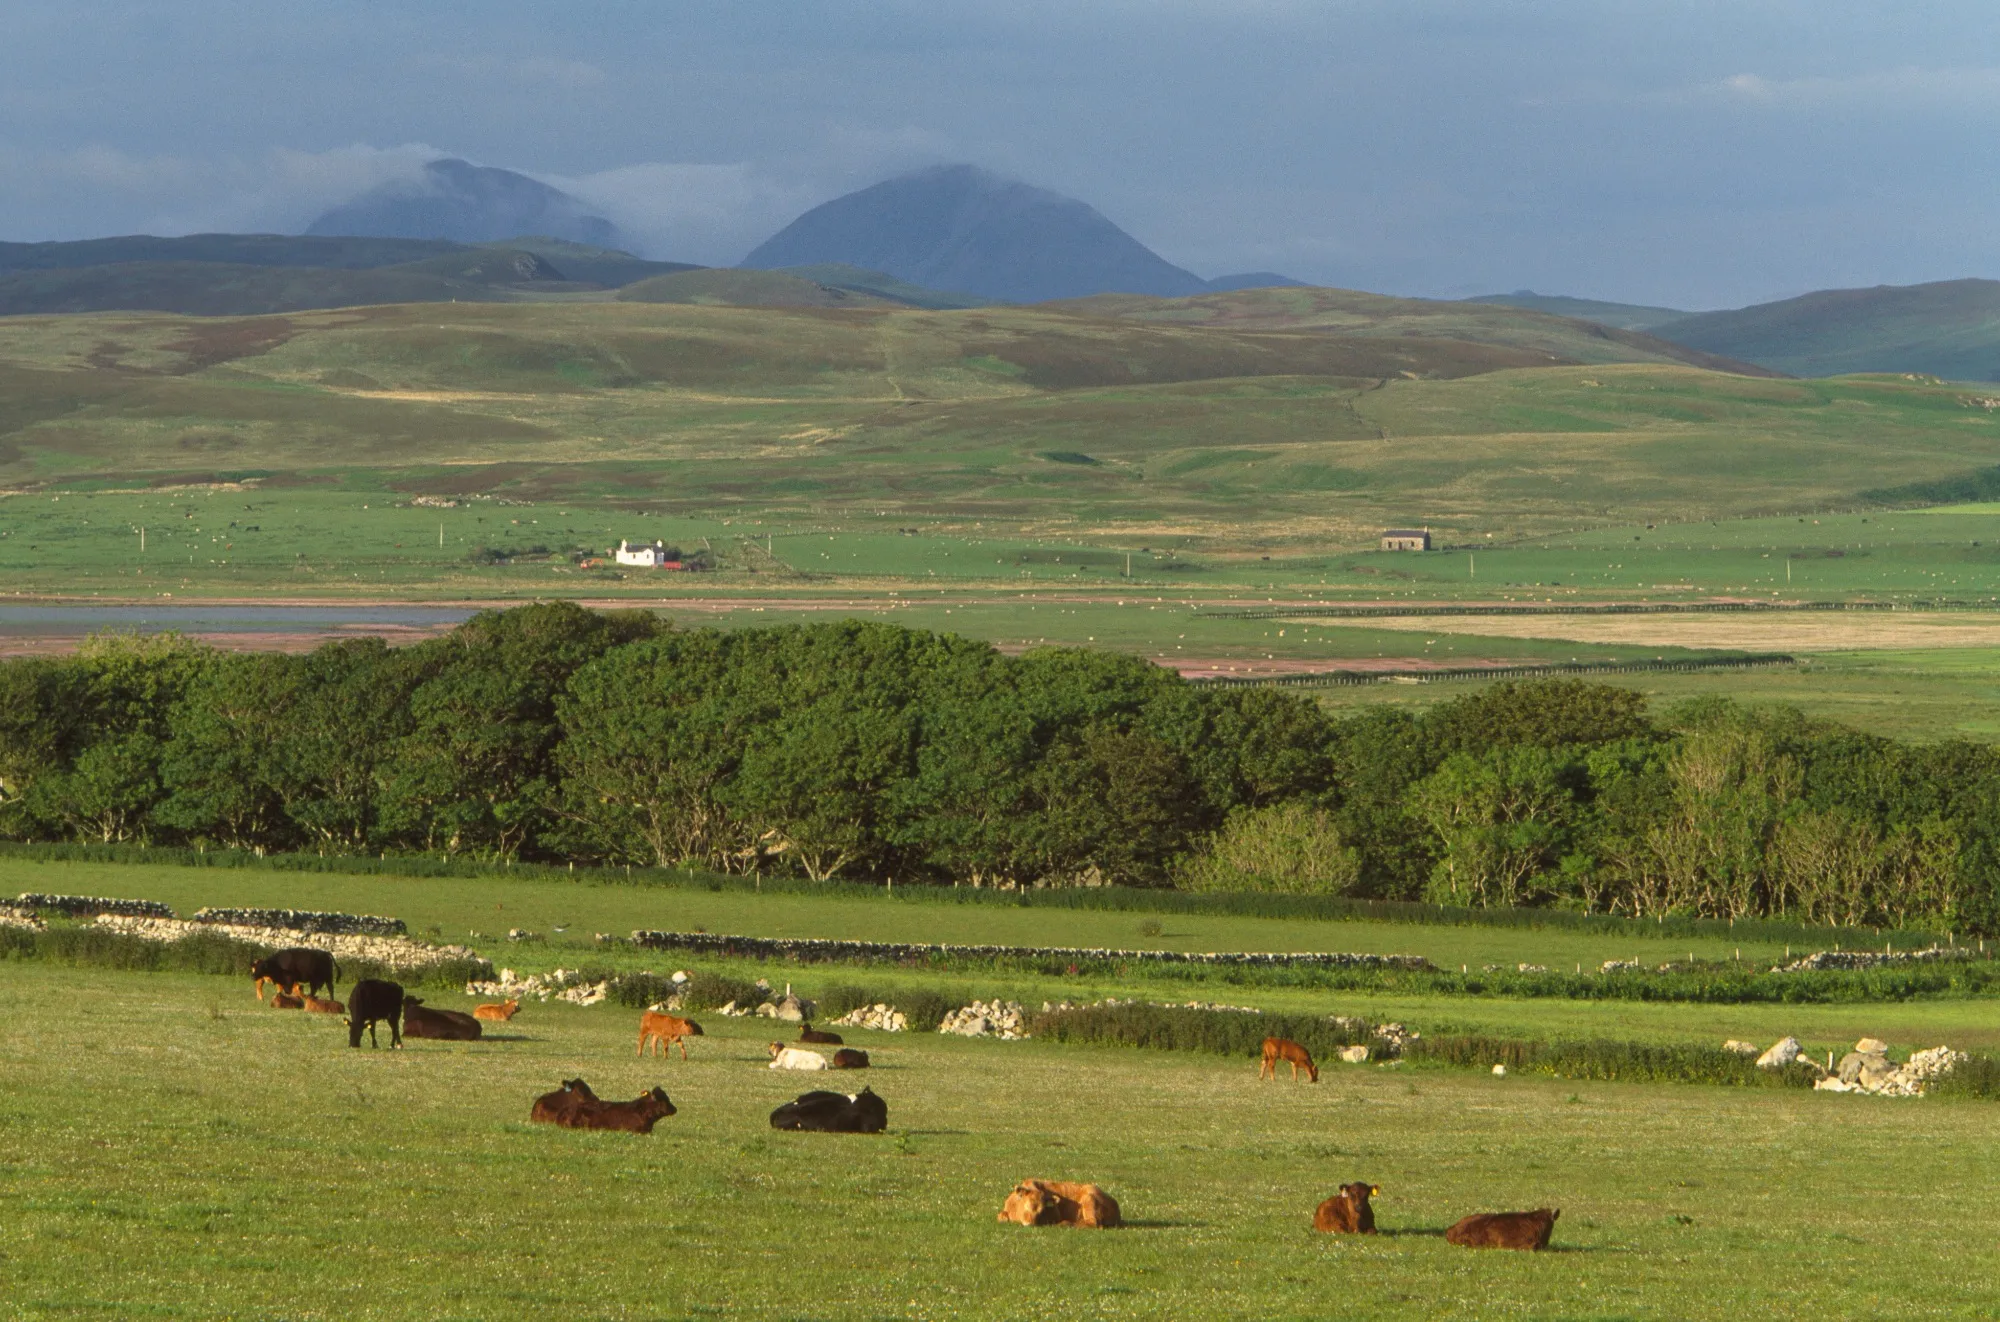 Cattle grazing above Aoradh, the Paps of Jura in the background, Loch Gruinart RSPB reserve